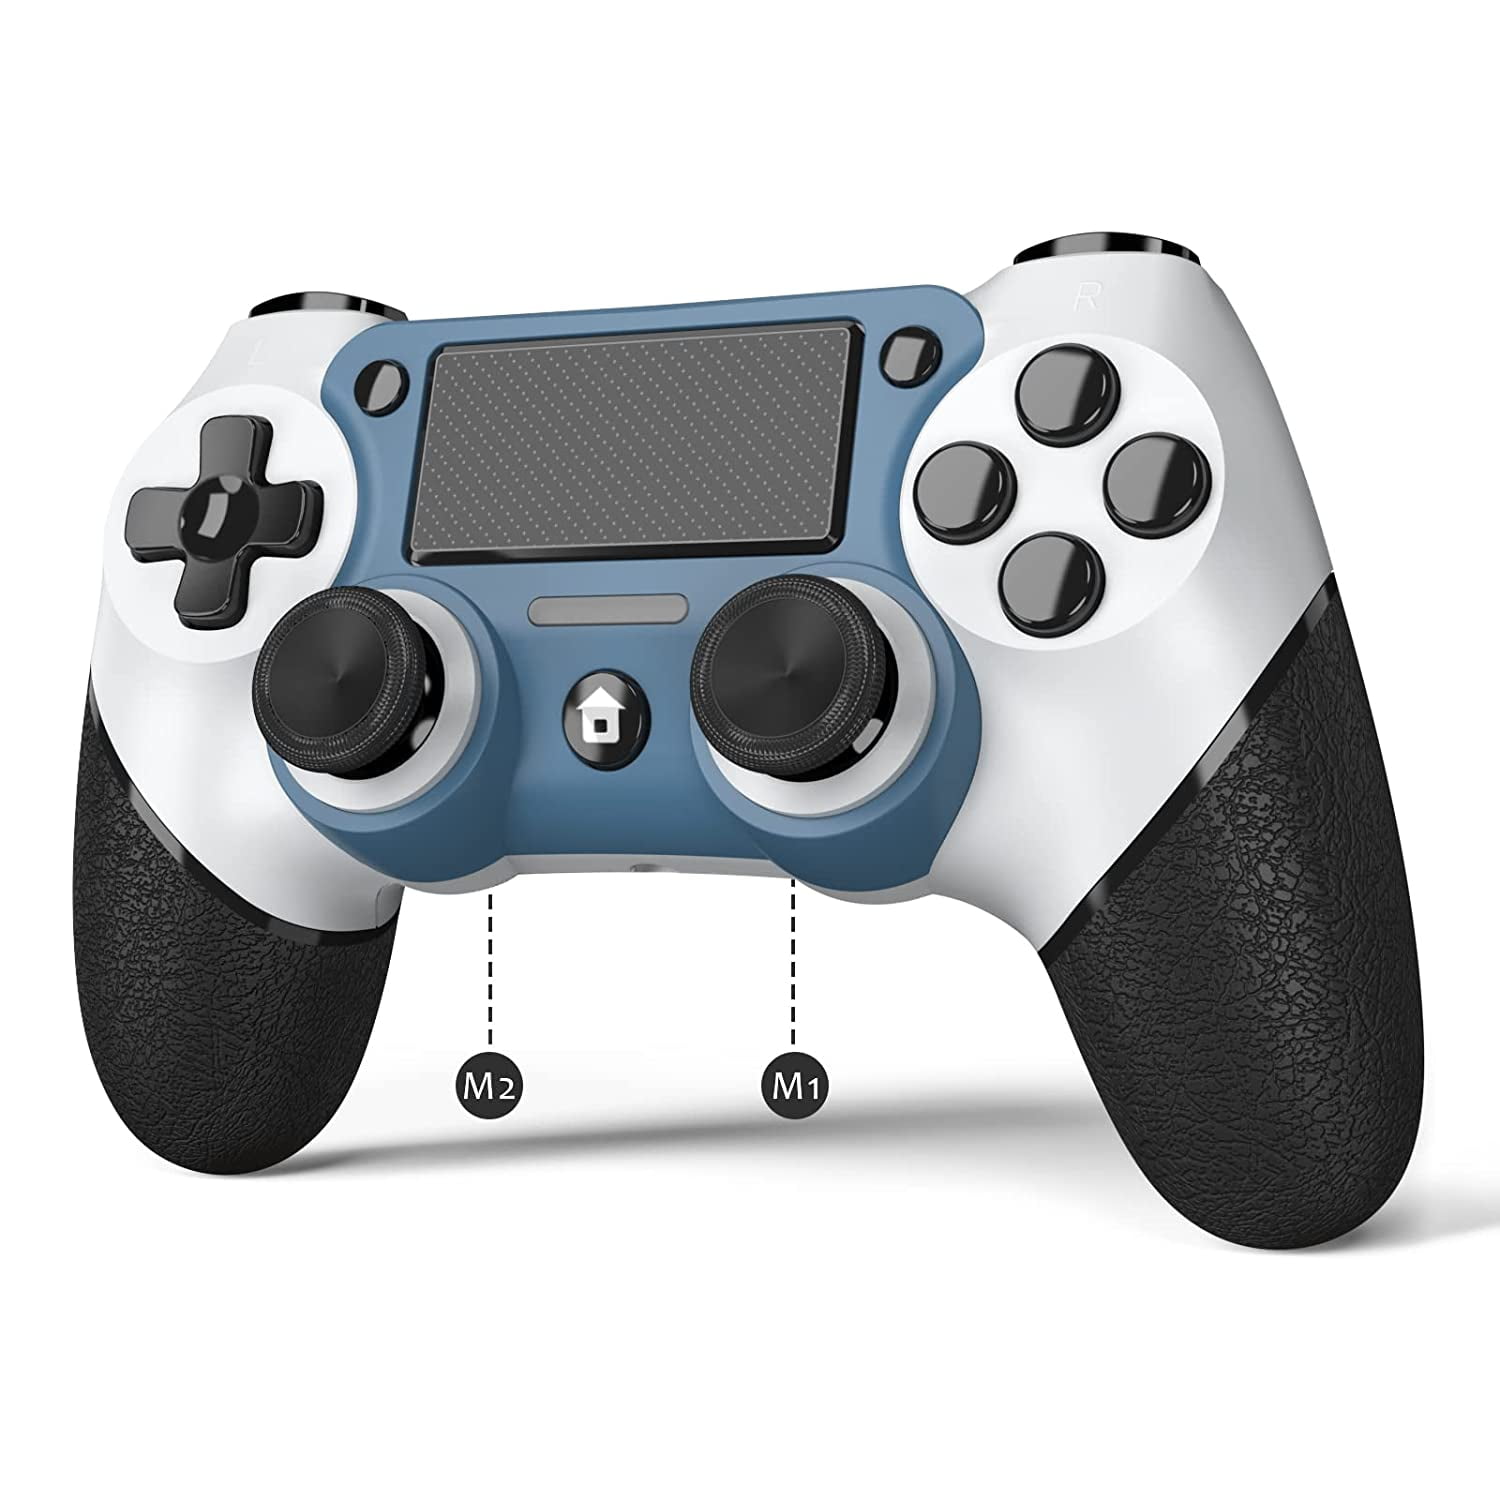 Custom Ps4 Wireless,Scuf Gamepad with Remapping Buttons/Dual Vibration/6-Axis Sensor/Touchpad/ Stereo Headset - Walmart.com